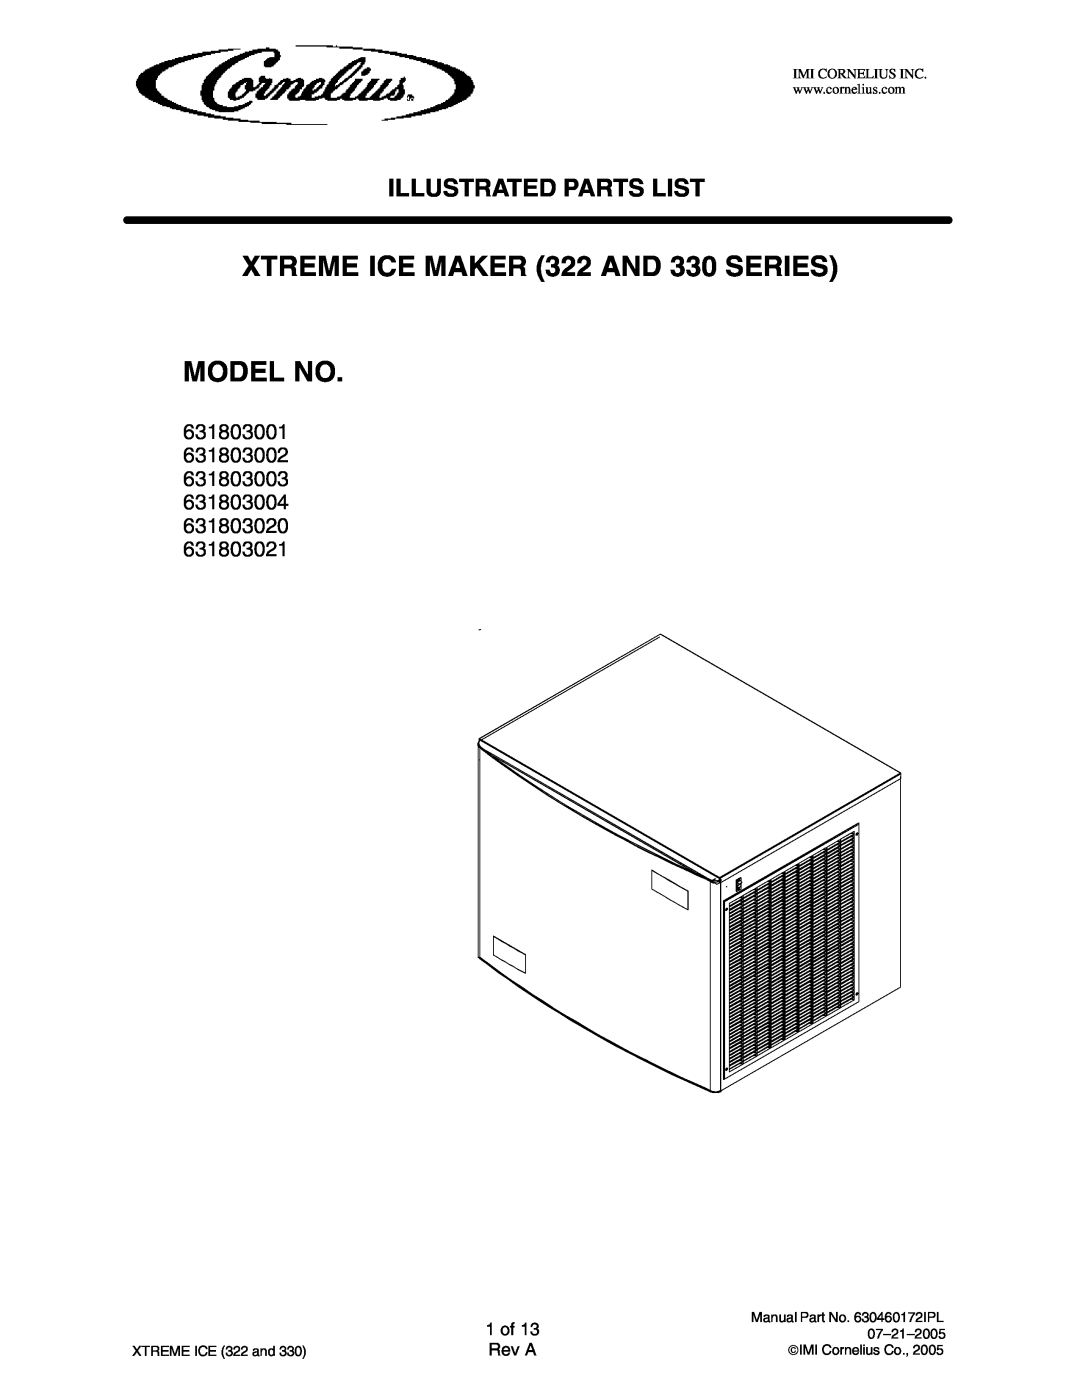 Cornelius 631803003 manual XTREME ICE MAKER 322 AND 330 SERIES MODEL NO, Illustrated Parts List, 1 of, Rev A, 631803001 